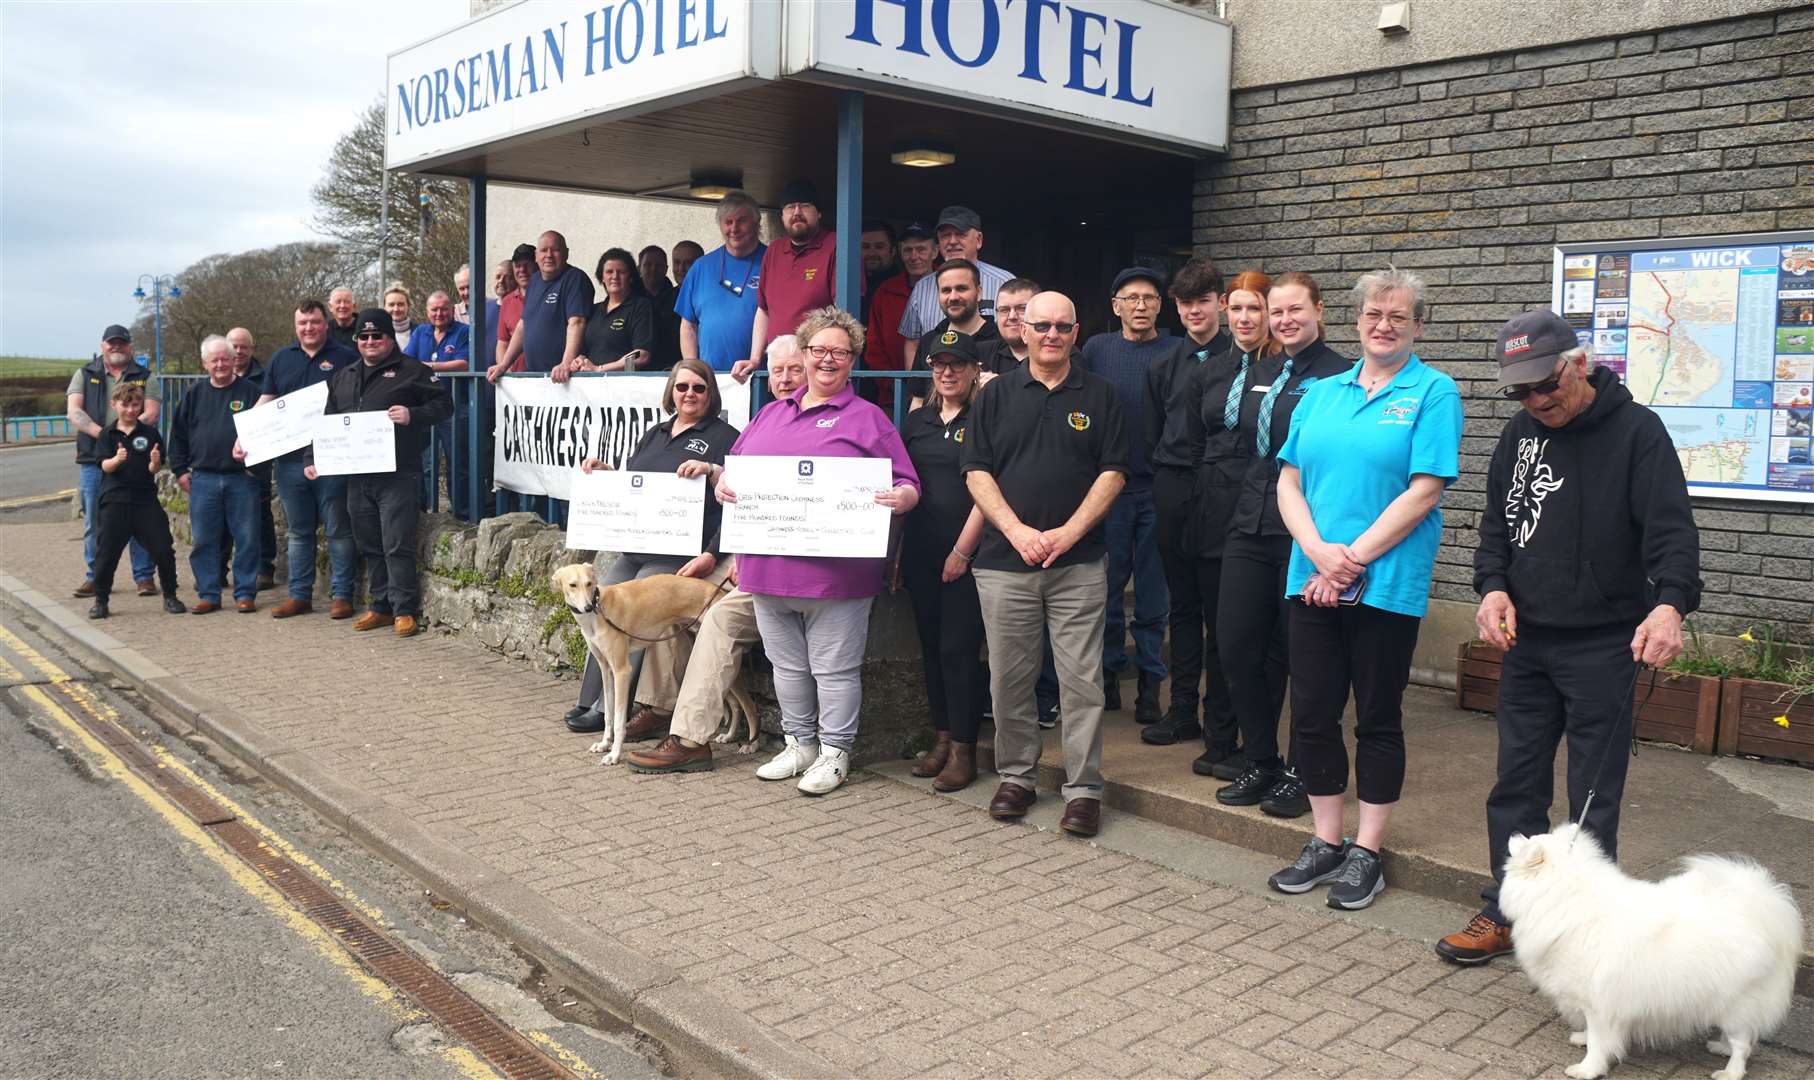 Four cheques totalling £2000 went to different charities thanks to the Caithness Model Club. Cats Protection, KWK9 Rescue, Thurso Lifeboat and Wick Lifeboat received £500 each at the handover outside the Norseman Hotel in Wick. Picture: DGS